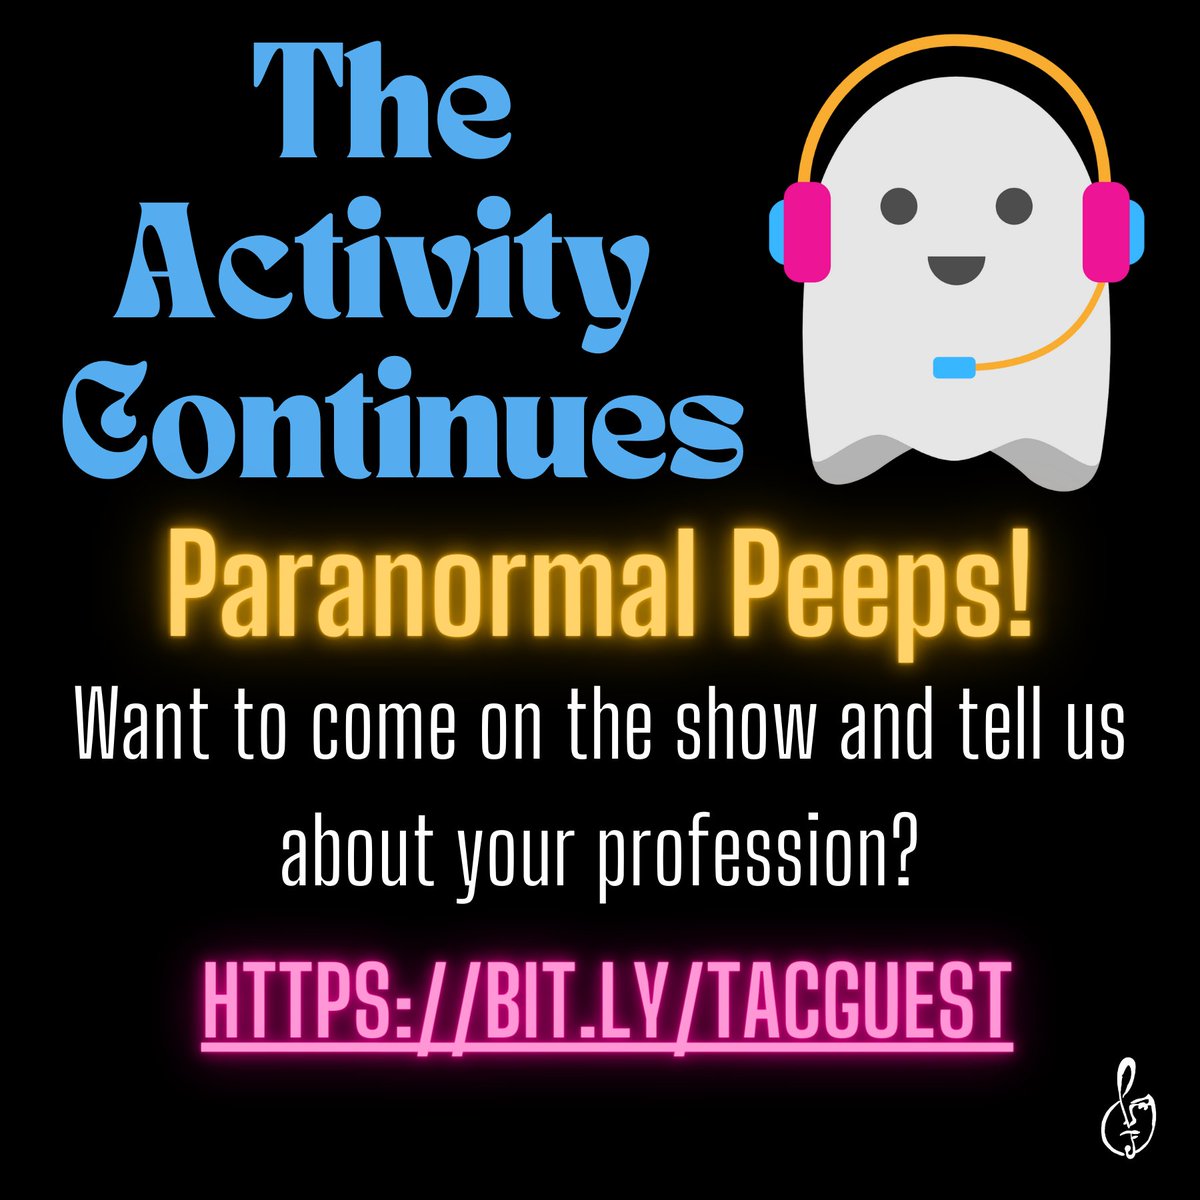 We are looking for people in the paranormal world to guest on our show: psychic, reiki master, medium, investigator, etc. Register if you're interested in being a guest on our show! bit.ly/TACguest
 #paranormal #ghosthunters #psychic #chaosmagician #reikimaster